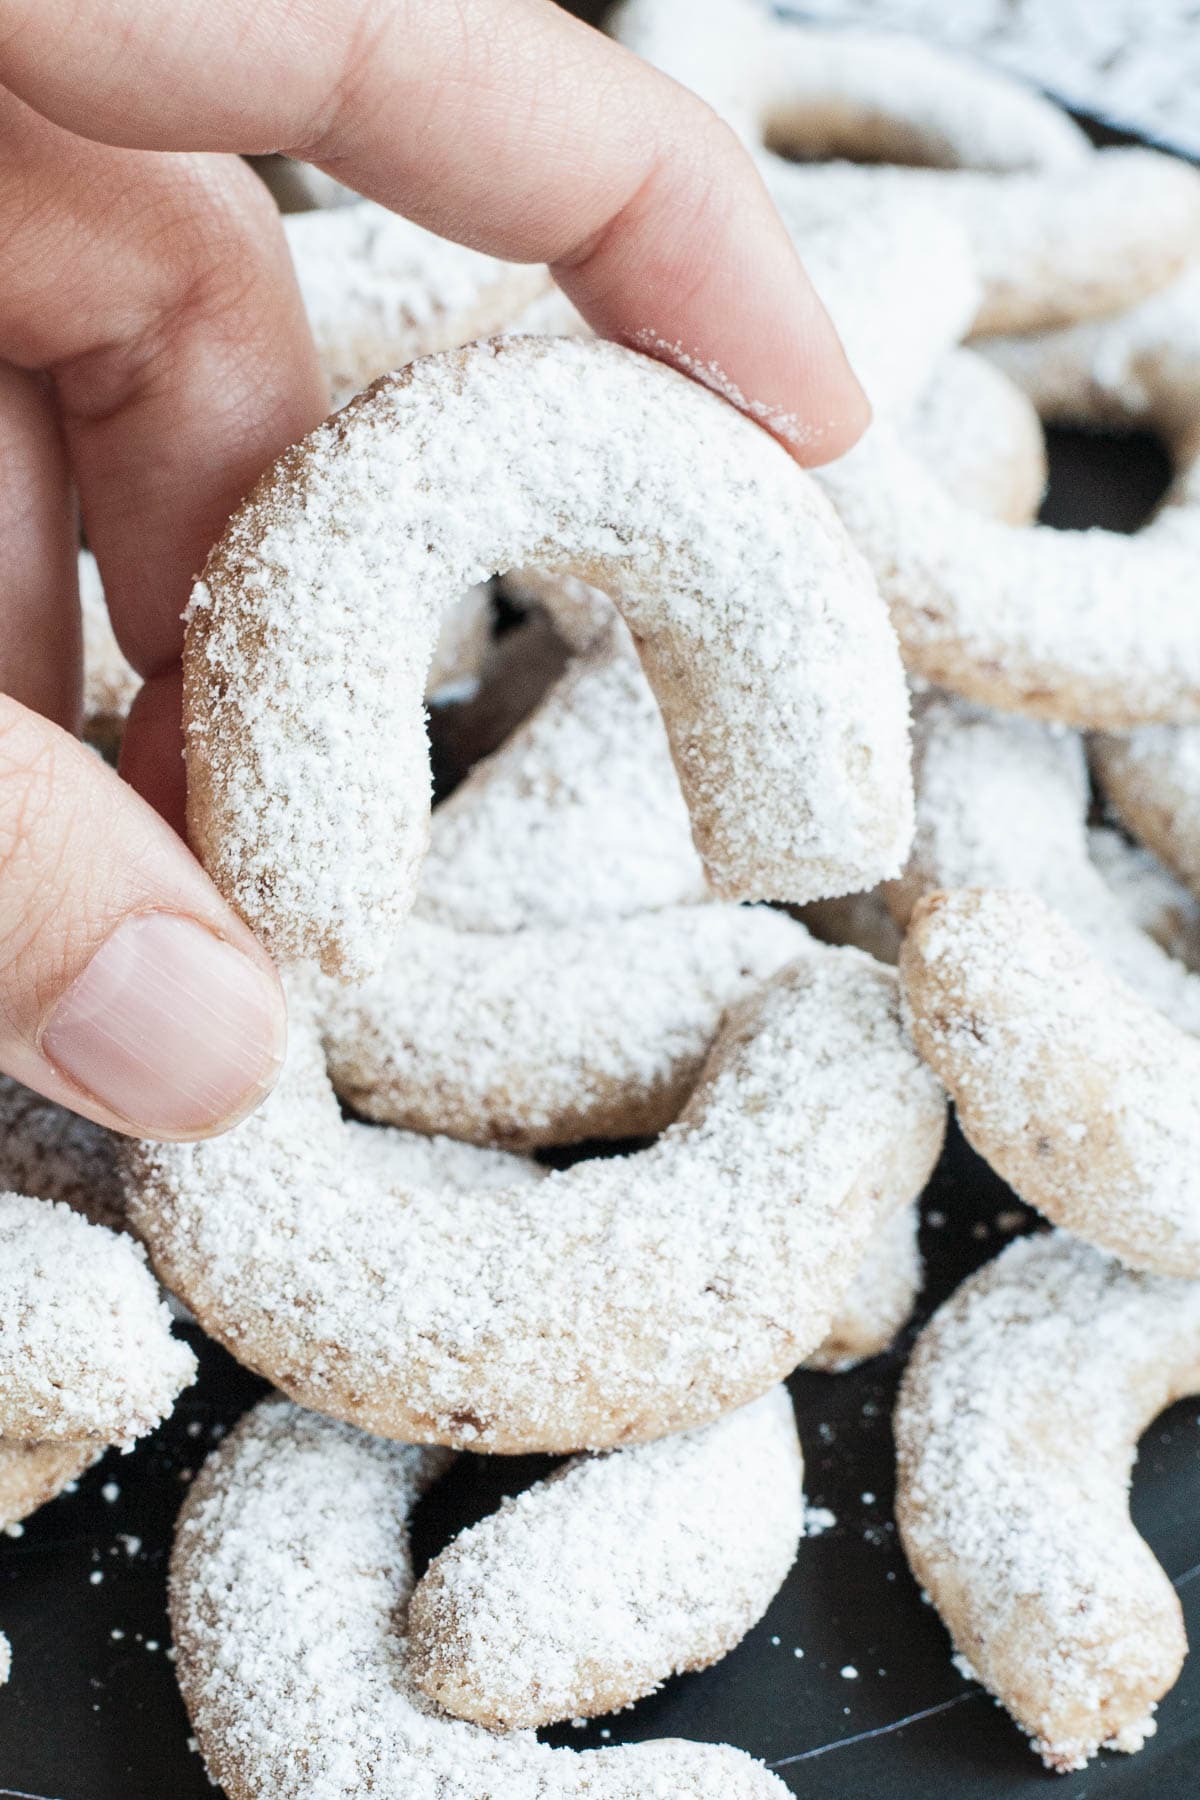 A large stack of crescent cookies on a black plate. Dusted with sugar. A hand is holding one cookie.